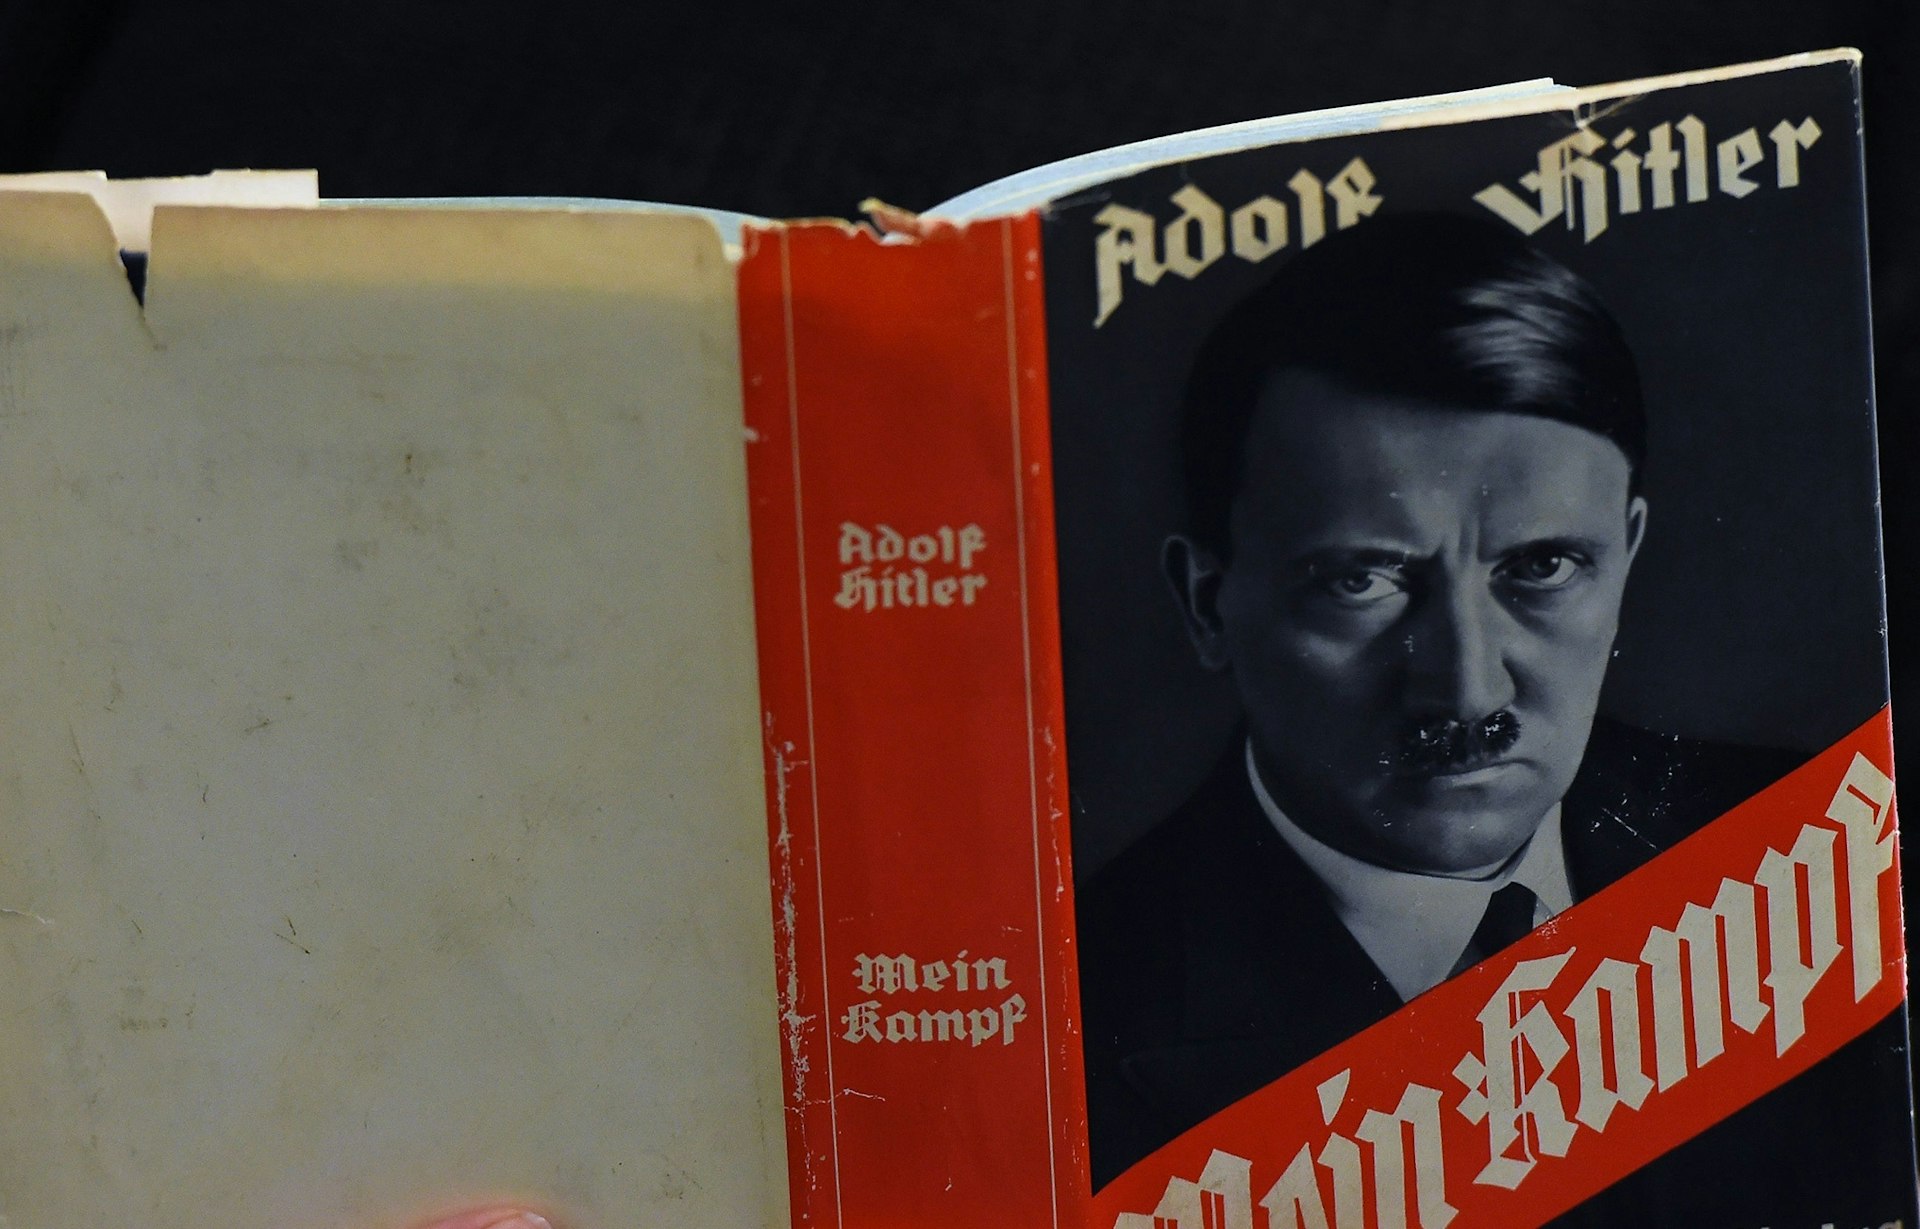 People are buying Mein Kampf: Should we be panicking?